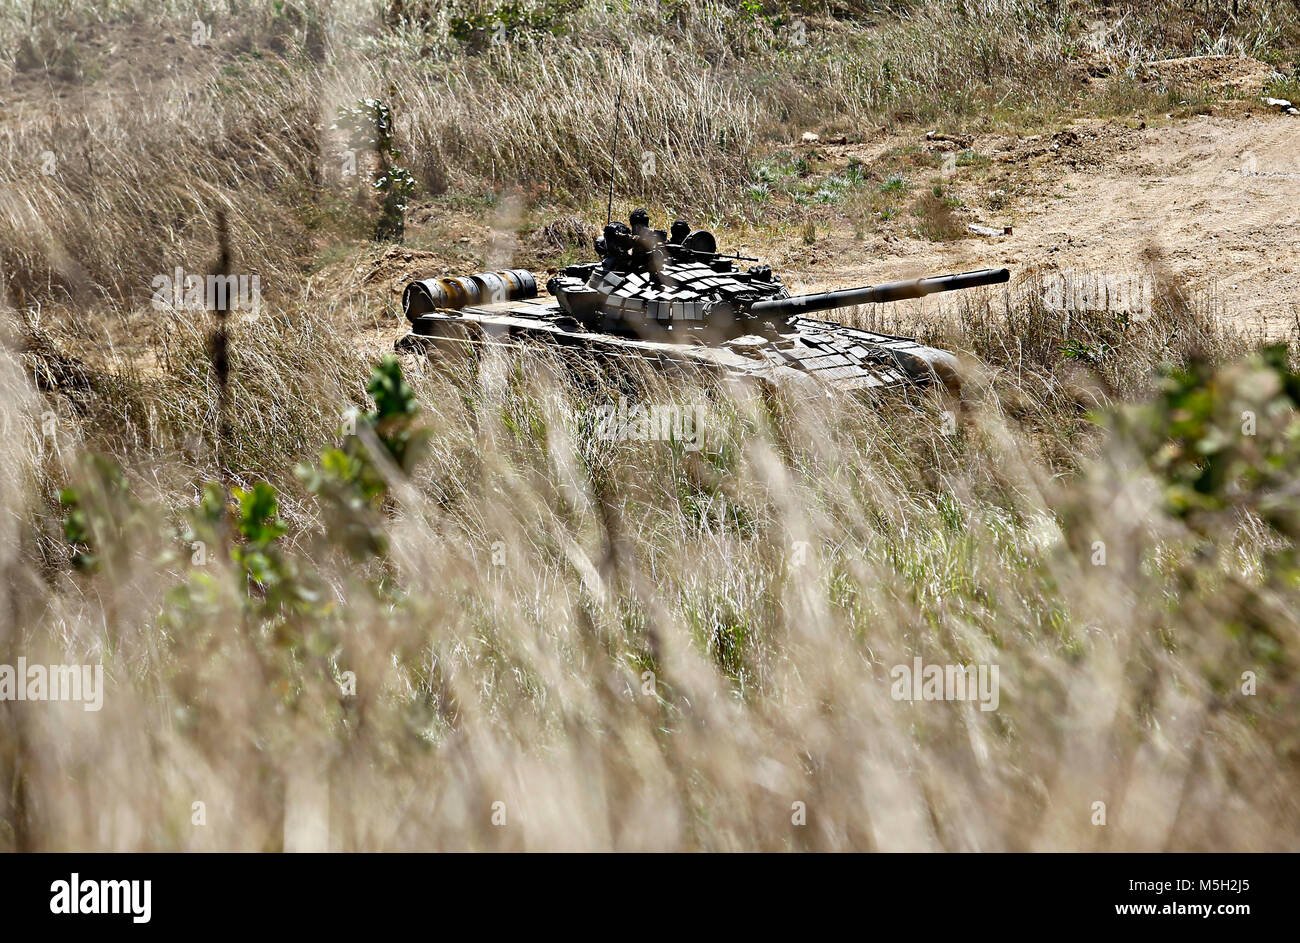 Naguanagua, Carabobo, Venezuela. 23rd Feb, 2018. February 23, 2018. Tanks of war models BMP3 and T72 conducted draw for cross-country obstacles, as part of the military exercises ''Soberania 2018'' ordered by President Nicolas Maduro. The war activity took place at the headquarters of the 41 Armored Brigade, located in Naguanagua, Carabobo state. Photo: Juan Carlos Hernandez Credit: Juan Carlos Hernandez/ZUMA Wire/Alamy Live News Stock Photo